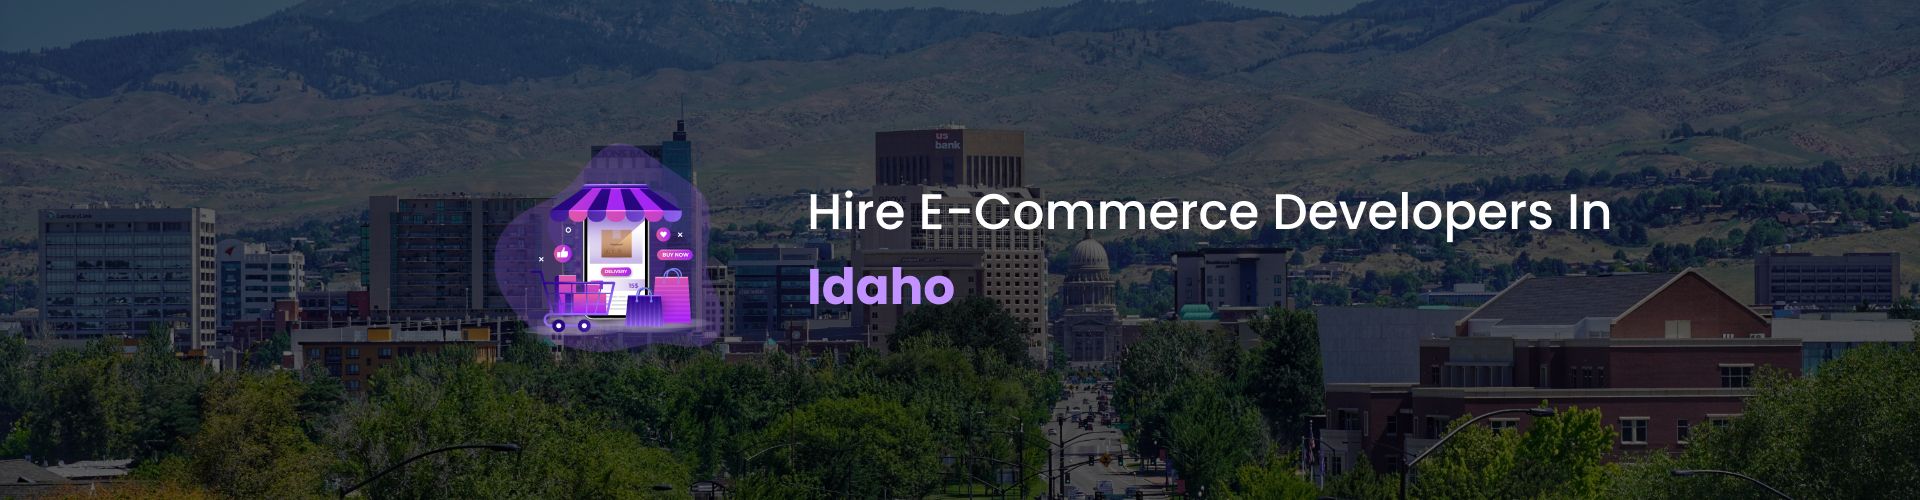 hire ecommerce developers in idaho